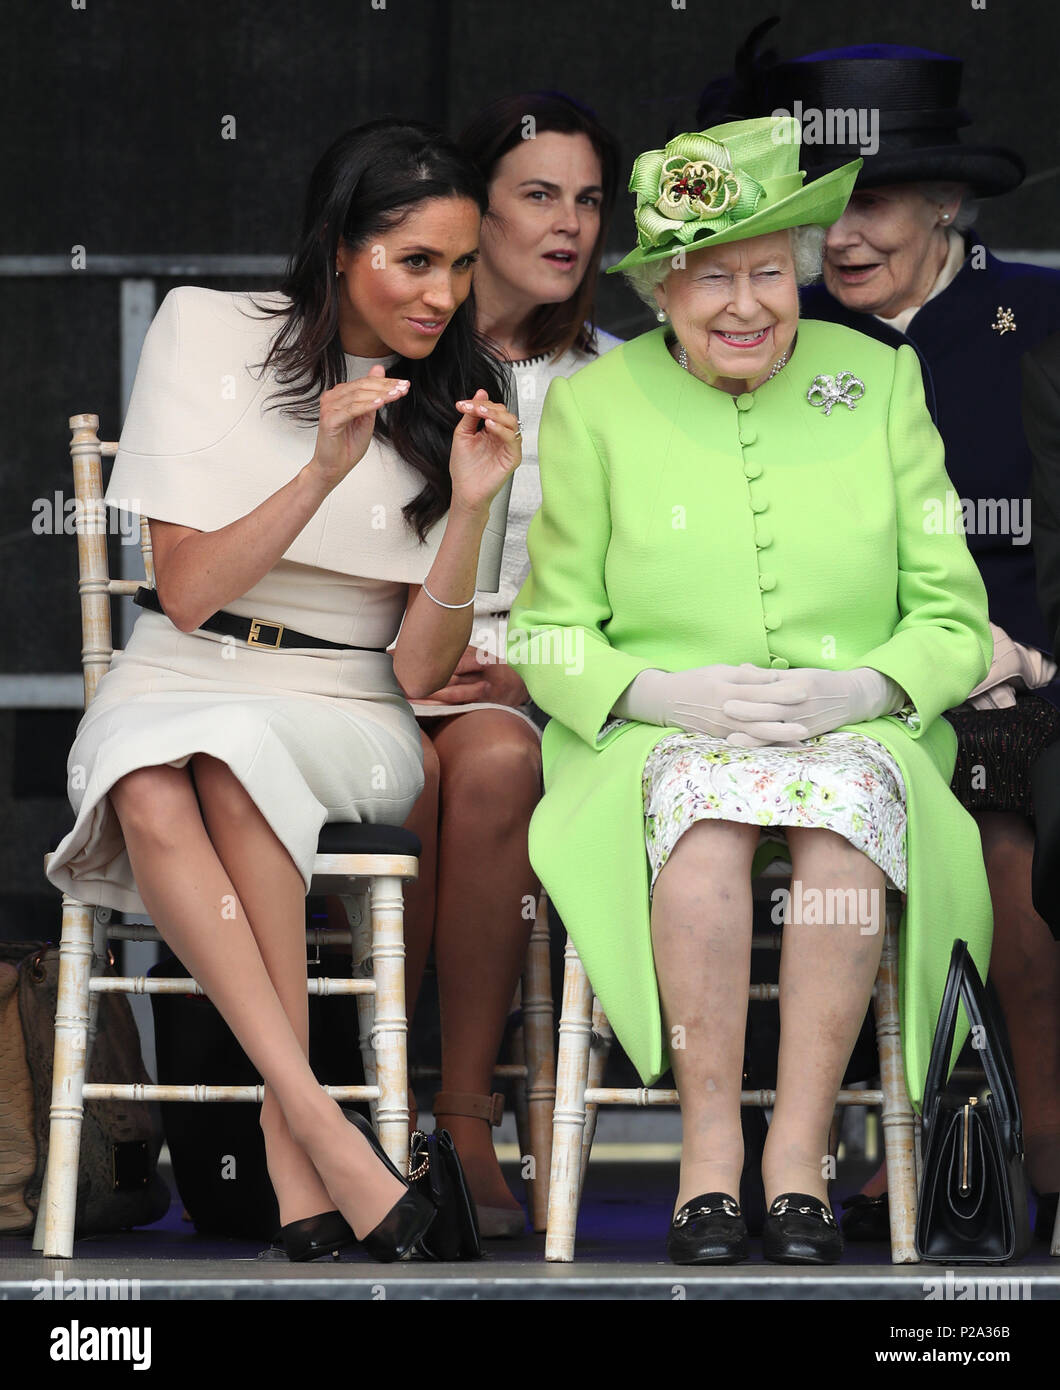 Queen Elizabeth II and the Duchess of Sussex at the opening of the new Mersey Gateway Bridge, in Widnes, Cheshire. In the background is Samantha Cohen, the Queen's former Assistant Private Secretary who is now working with the Duchess. Stock Photo